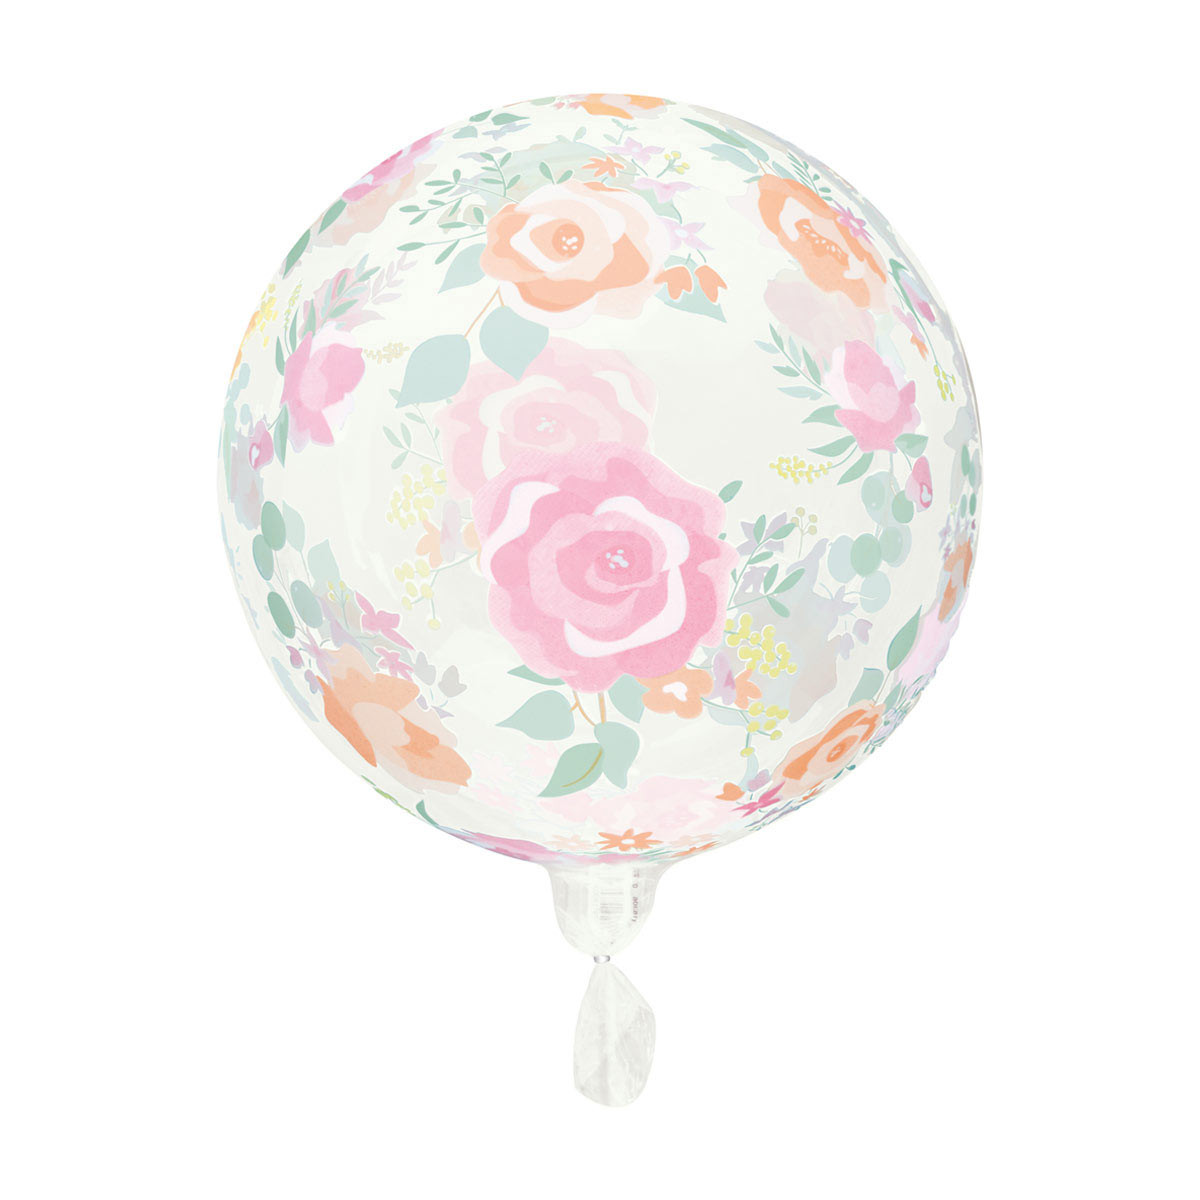 Giant Clear Pink Blooms Sphere Balloon, 24 in